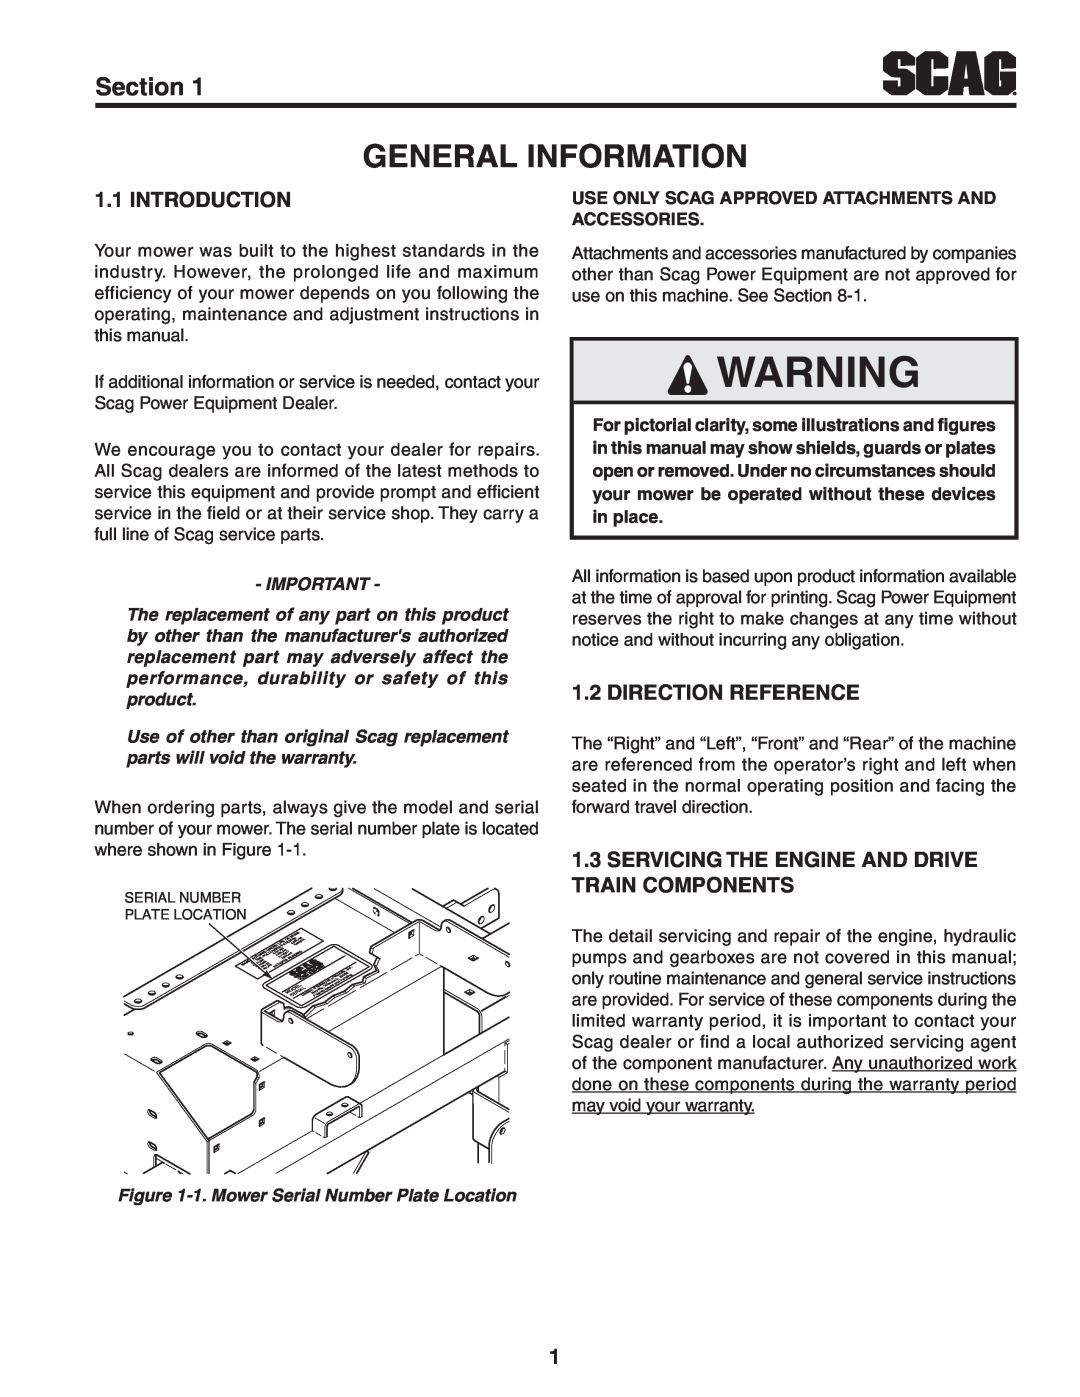 Scag Power Equipment STT-31EFI-SS operating instructions General Information, Section, Introduction, Direction Reference 